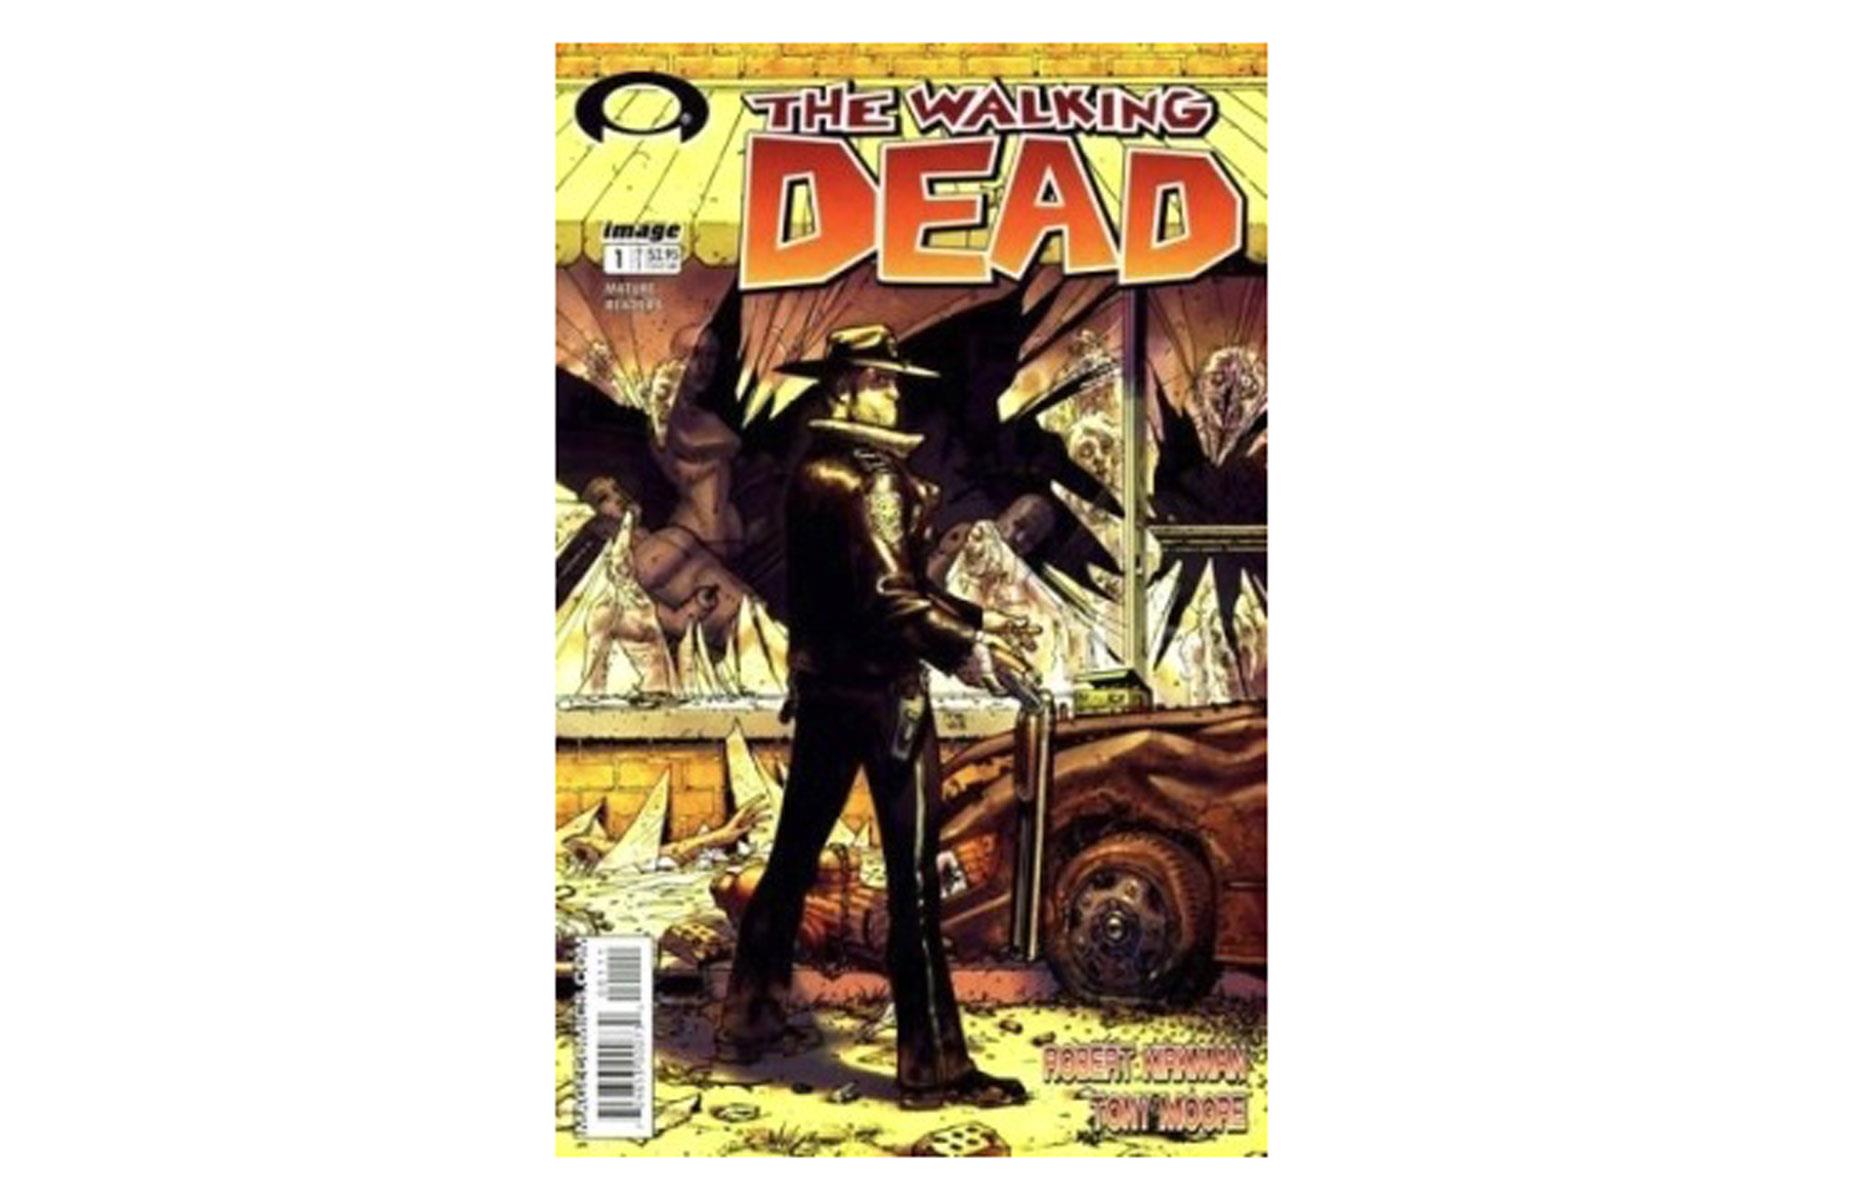 The Walking Dead #1: up to $2,100 (£1,580)